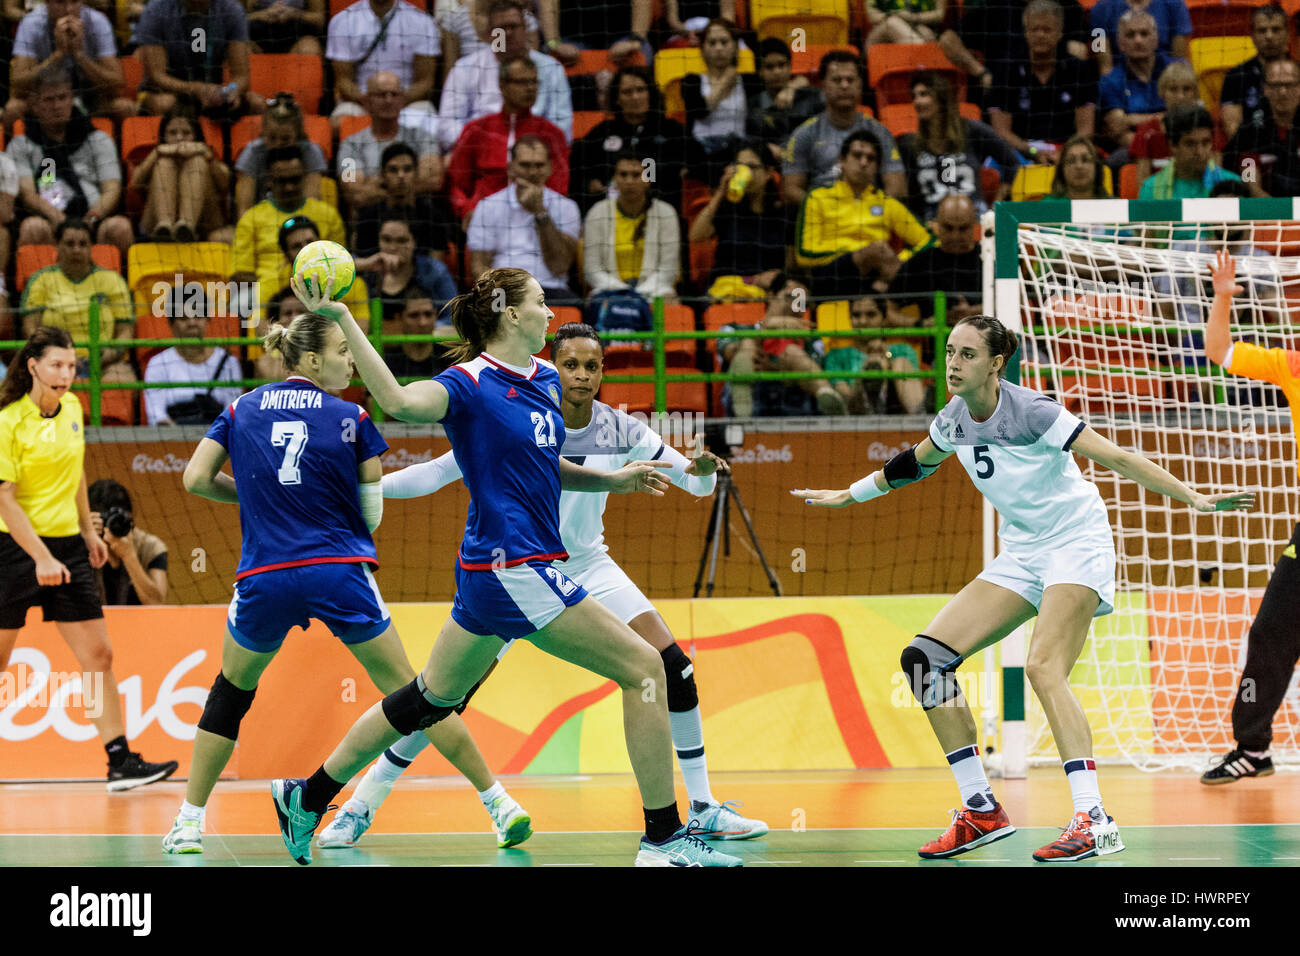 Rio de Janeiro, Brazil. 20 August 2016 Victoria Zhilinskayte (RUS) #21 defended by Camille Ayglon-Saurina (FRA) #5 in the women's handball gold medal  Stock Photo